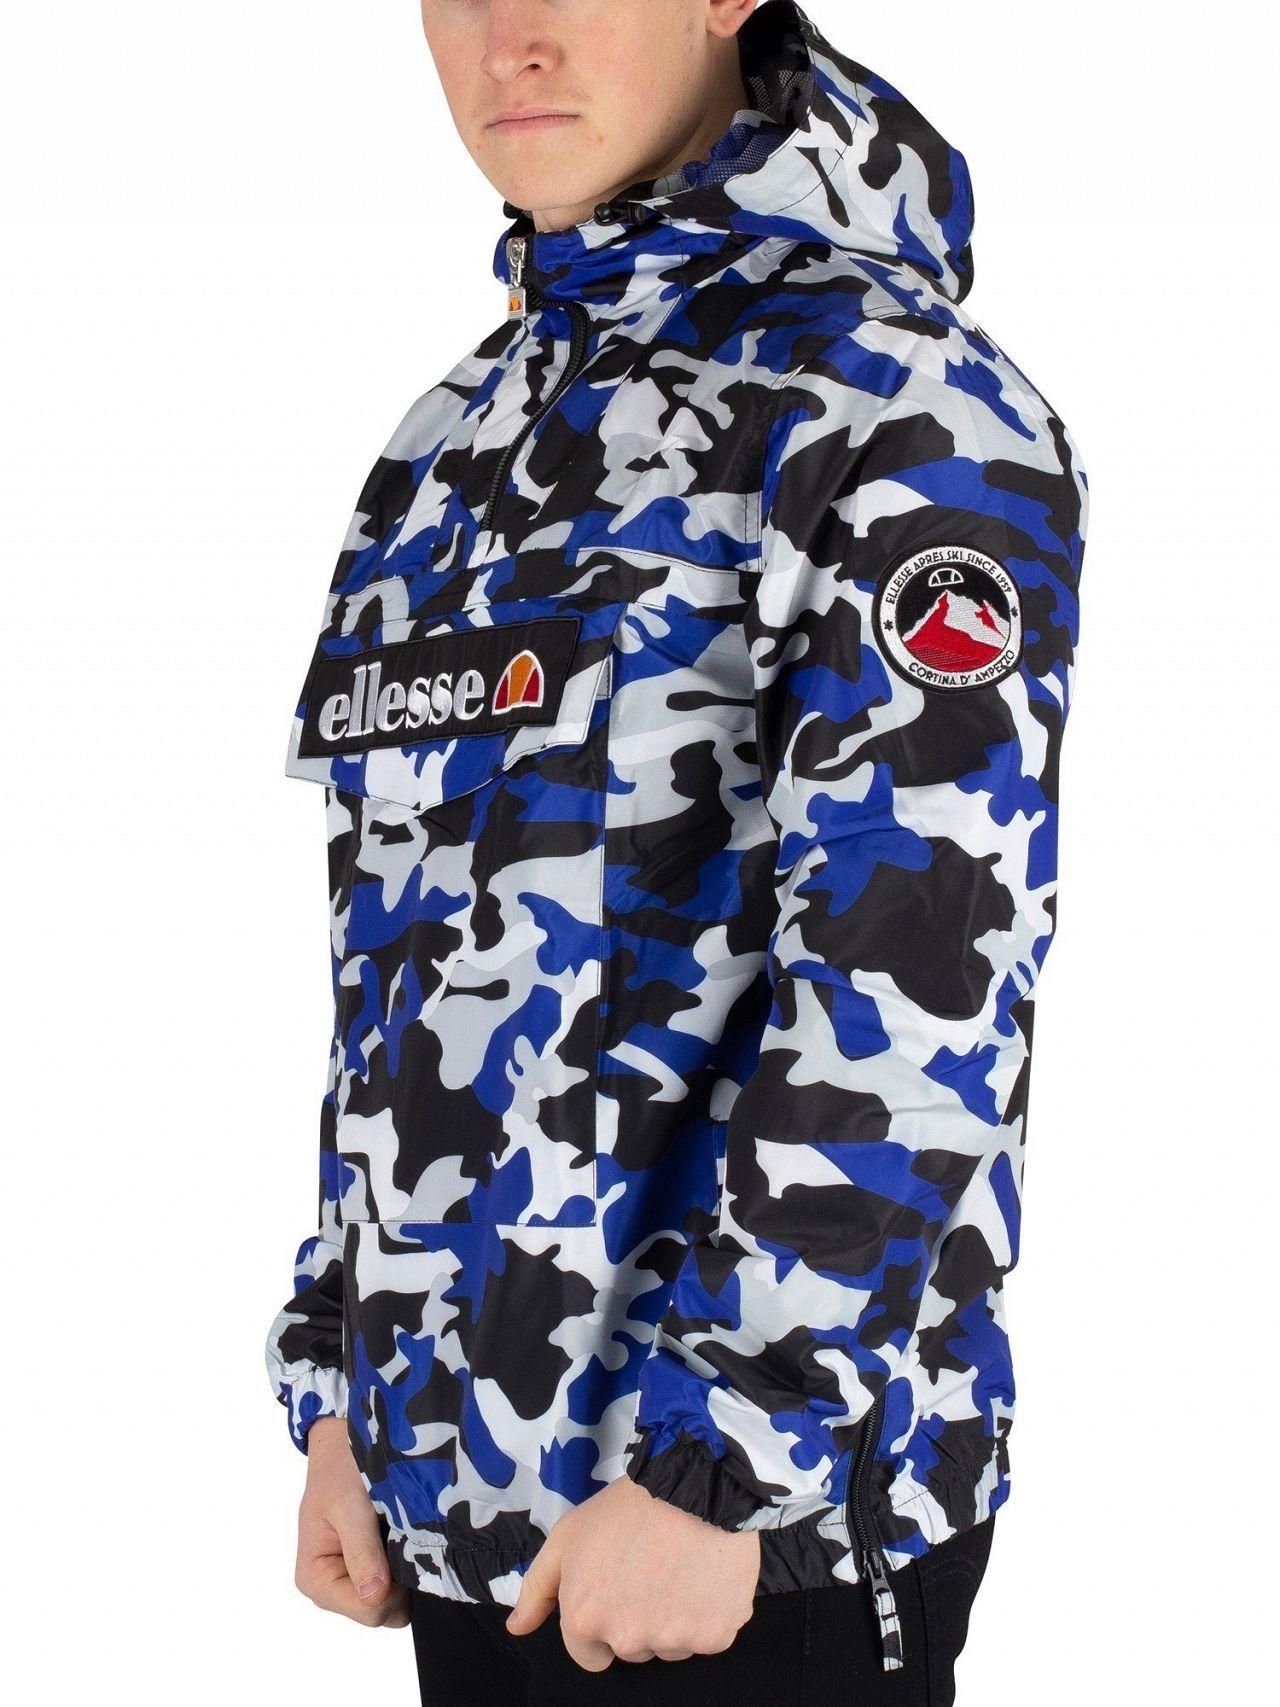 Ellesse Synthetic Camo Mont 2 Overhead Jacket in Blue for Men - Lyst